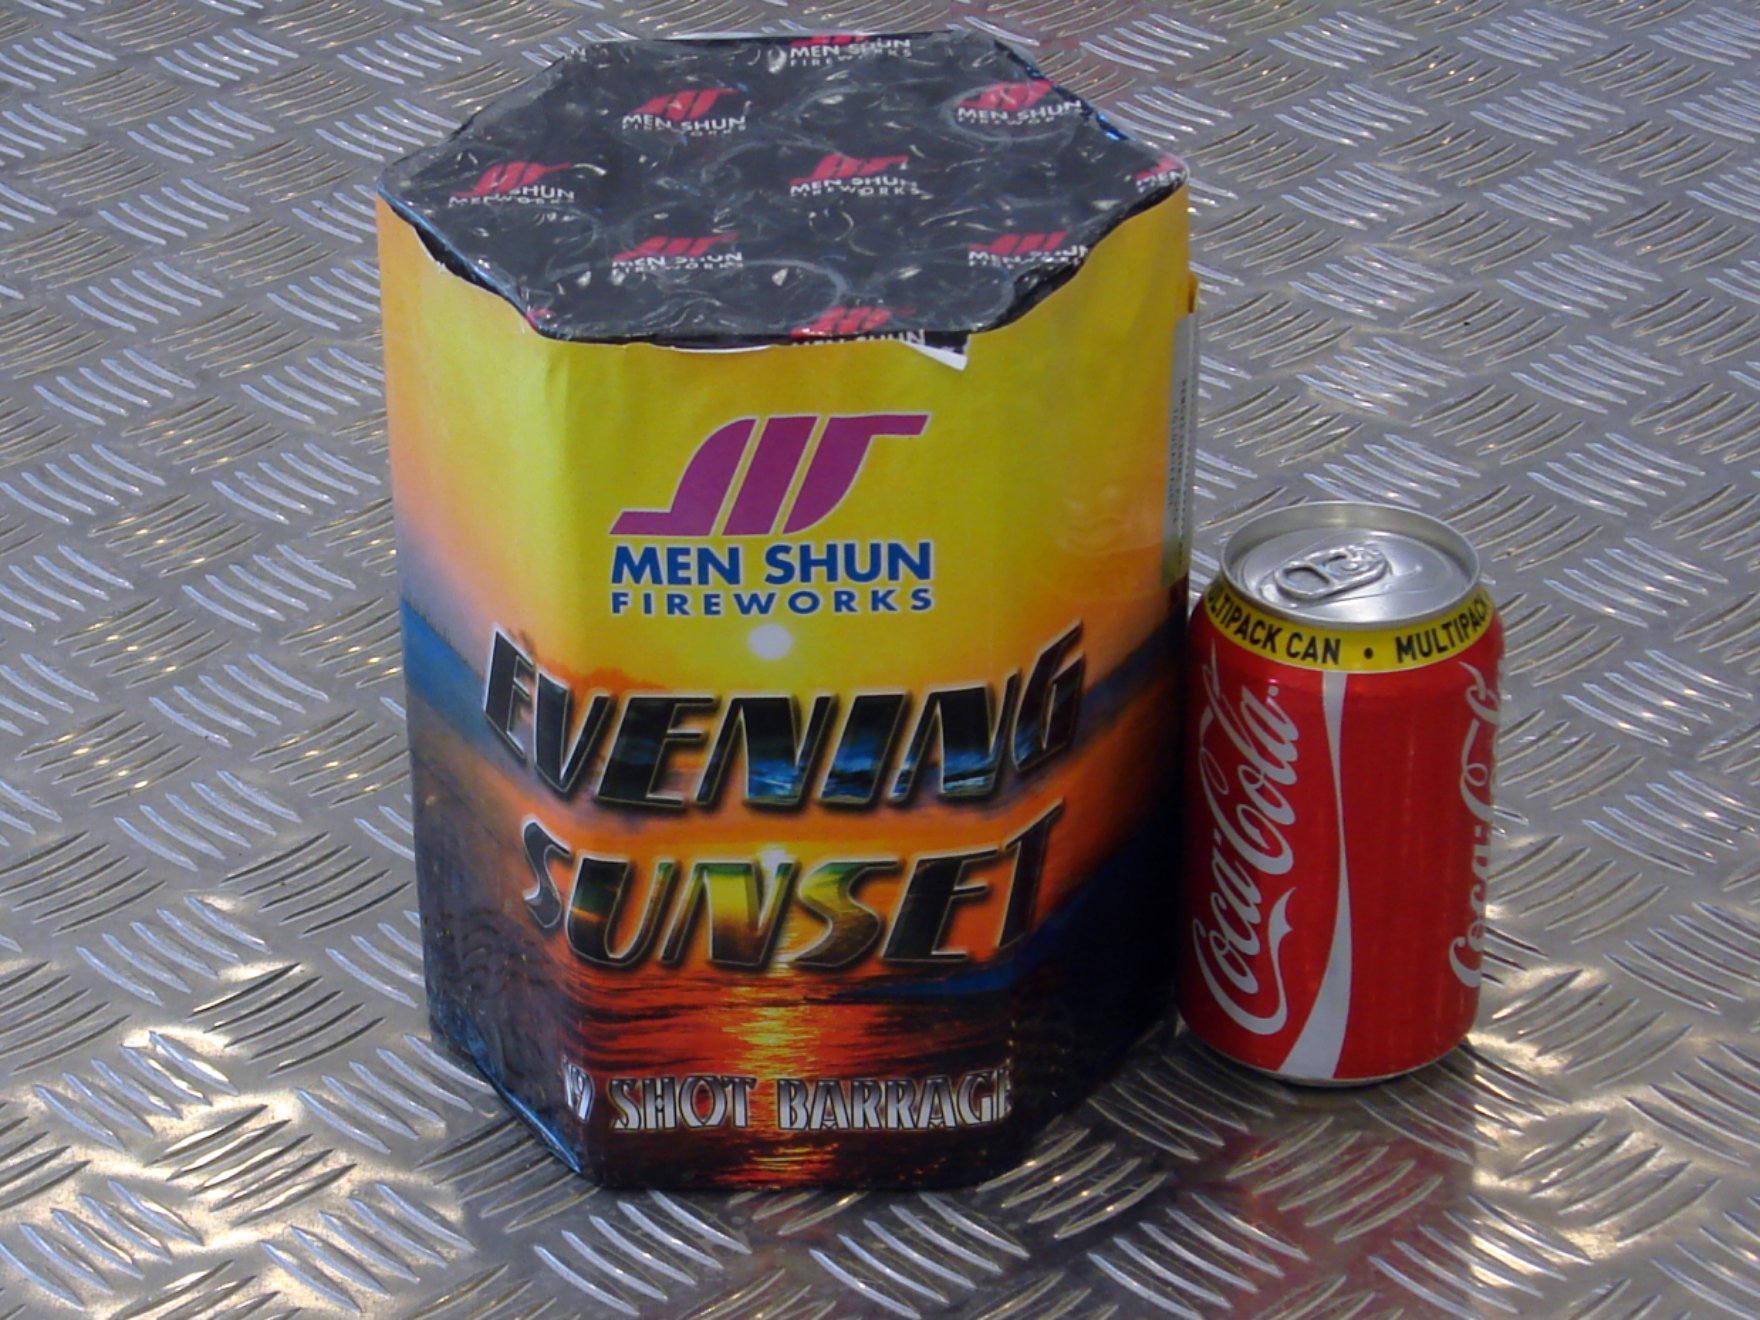 can and canister on shiny metal surface